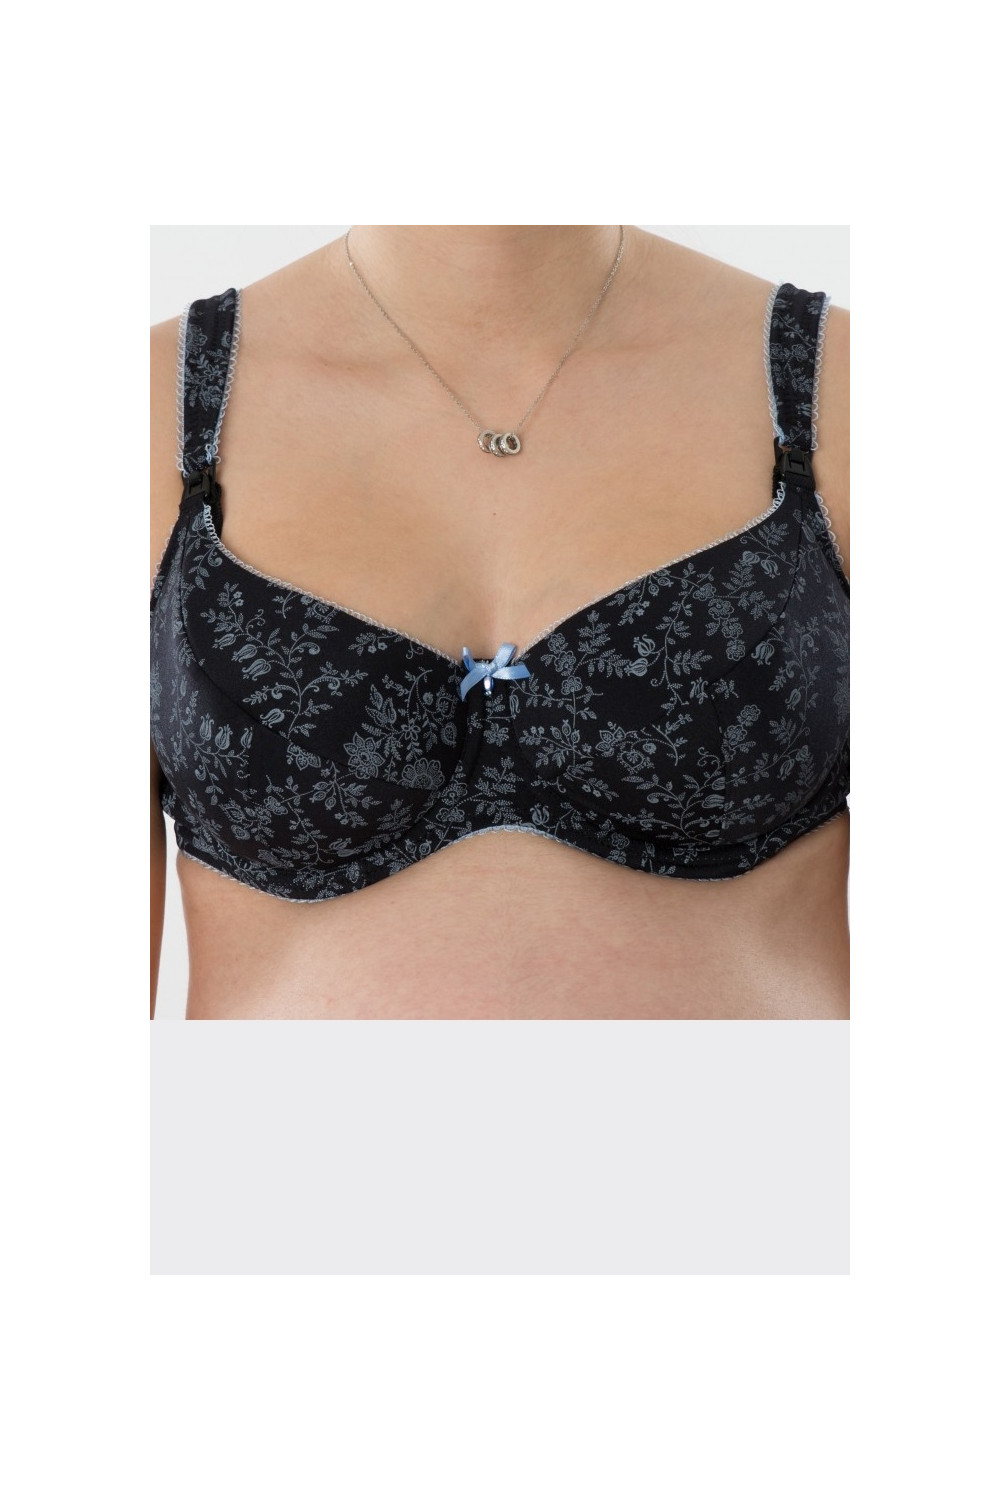 Comfortable nursing bra with soft underwire. With pre-formed